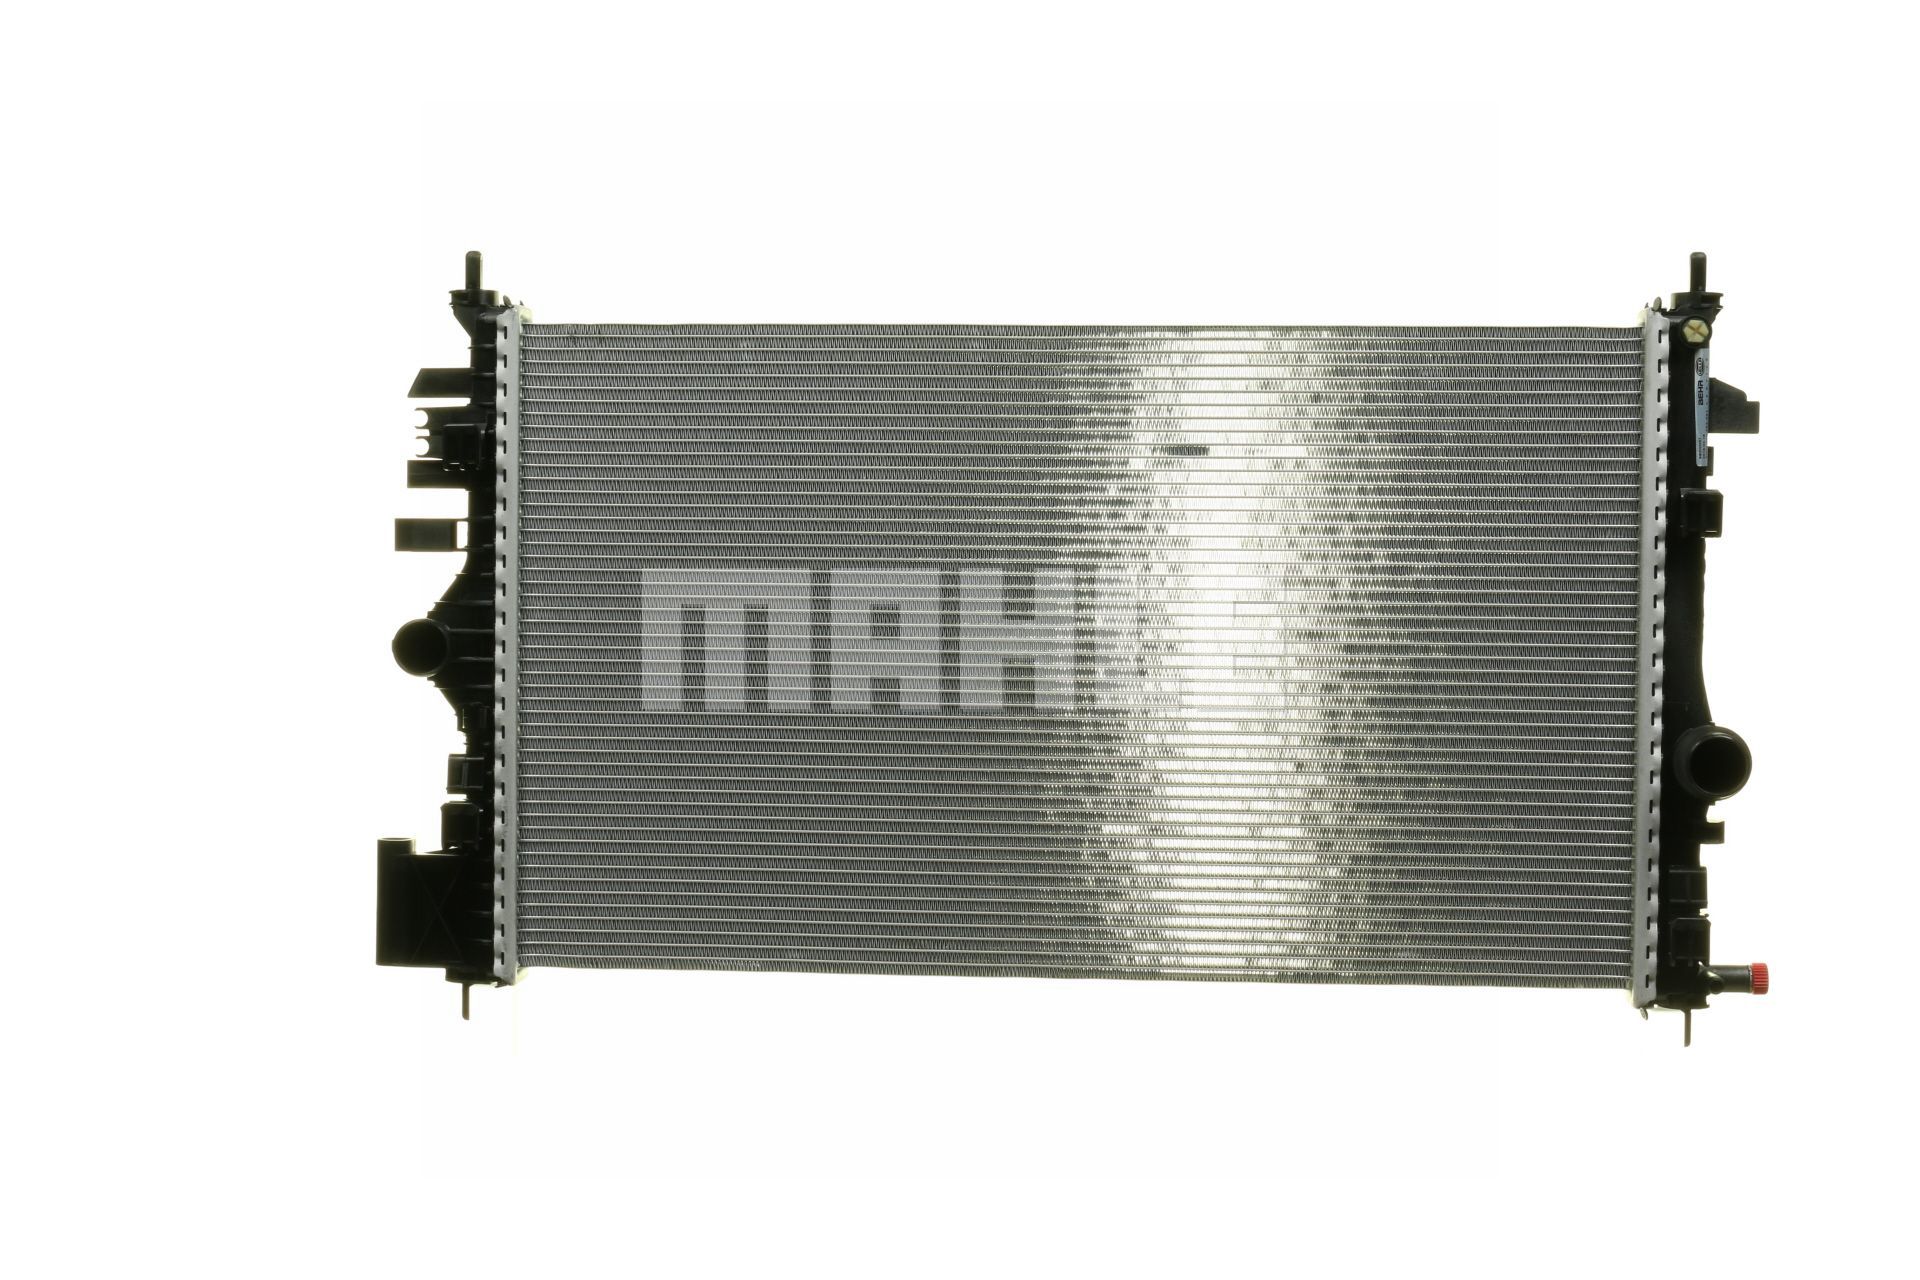 MAHLE ORIGINAL CR 1102 000P Engine radiator for vehicles with air conditioning, 680 x 398 x 26 mm, Manual Transmission, Brazed cooling fins